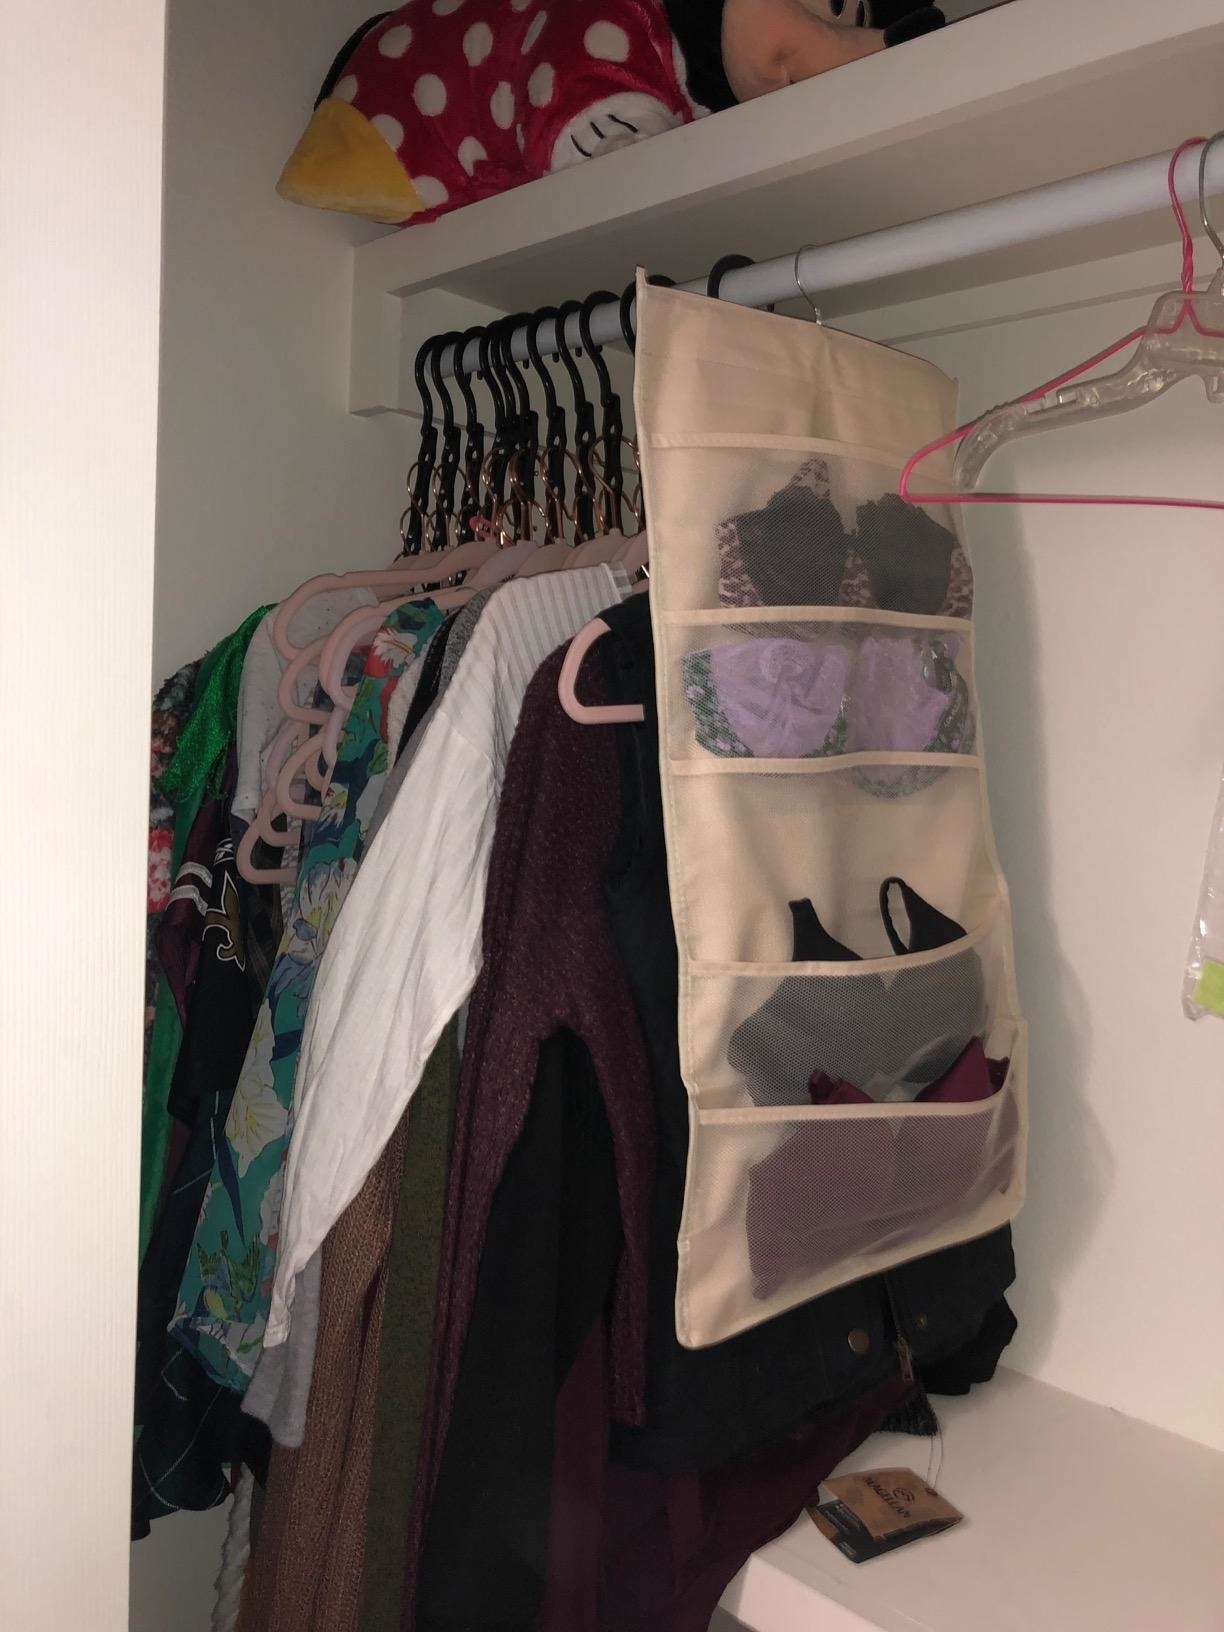 A reviewers organizer hanging in the closet filled with bras